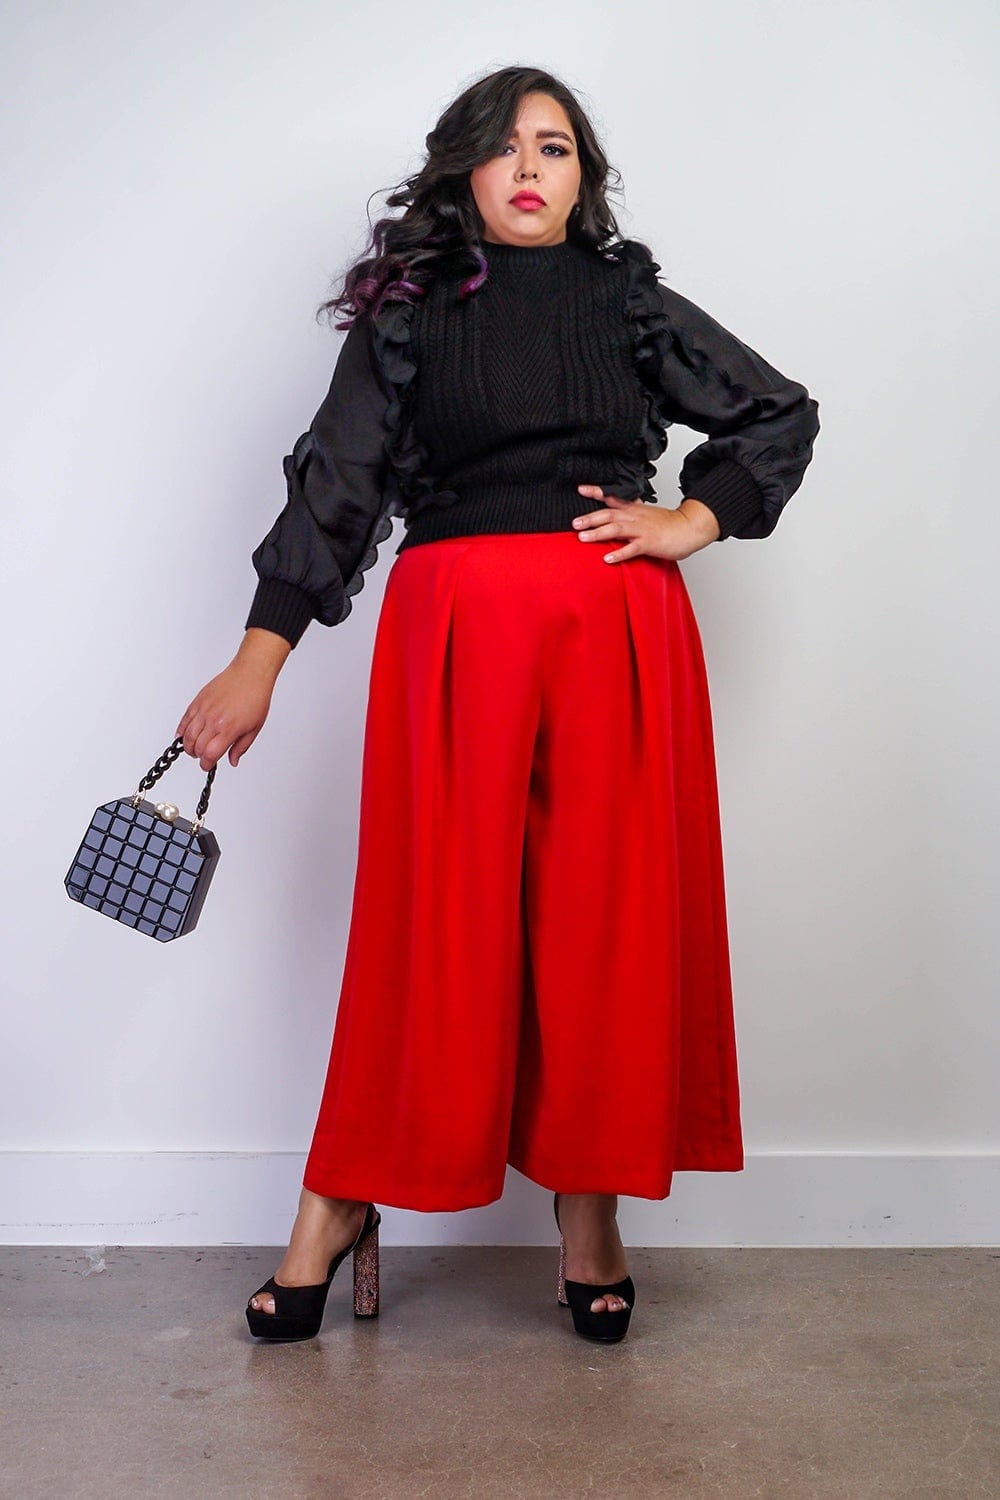 High-waisted Red Pants Elegant Palazzo Pants. Wide Leg Pants, Pants Skirt,  Elegant Trousers, Trousers With Pockets, Evening Pants -  Canada